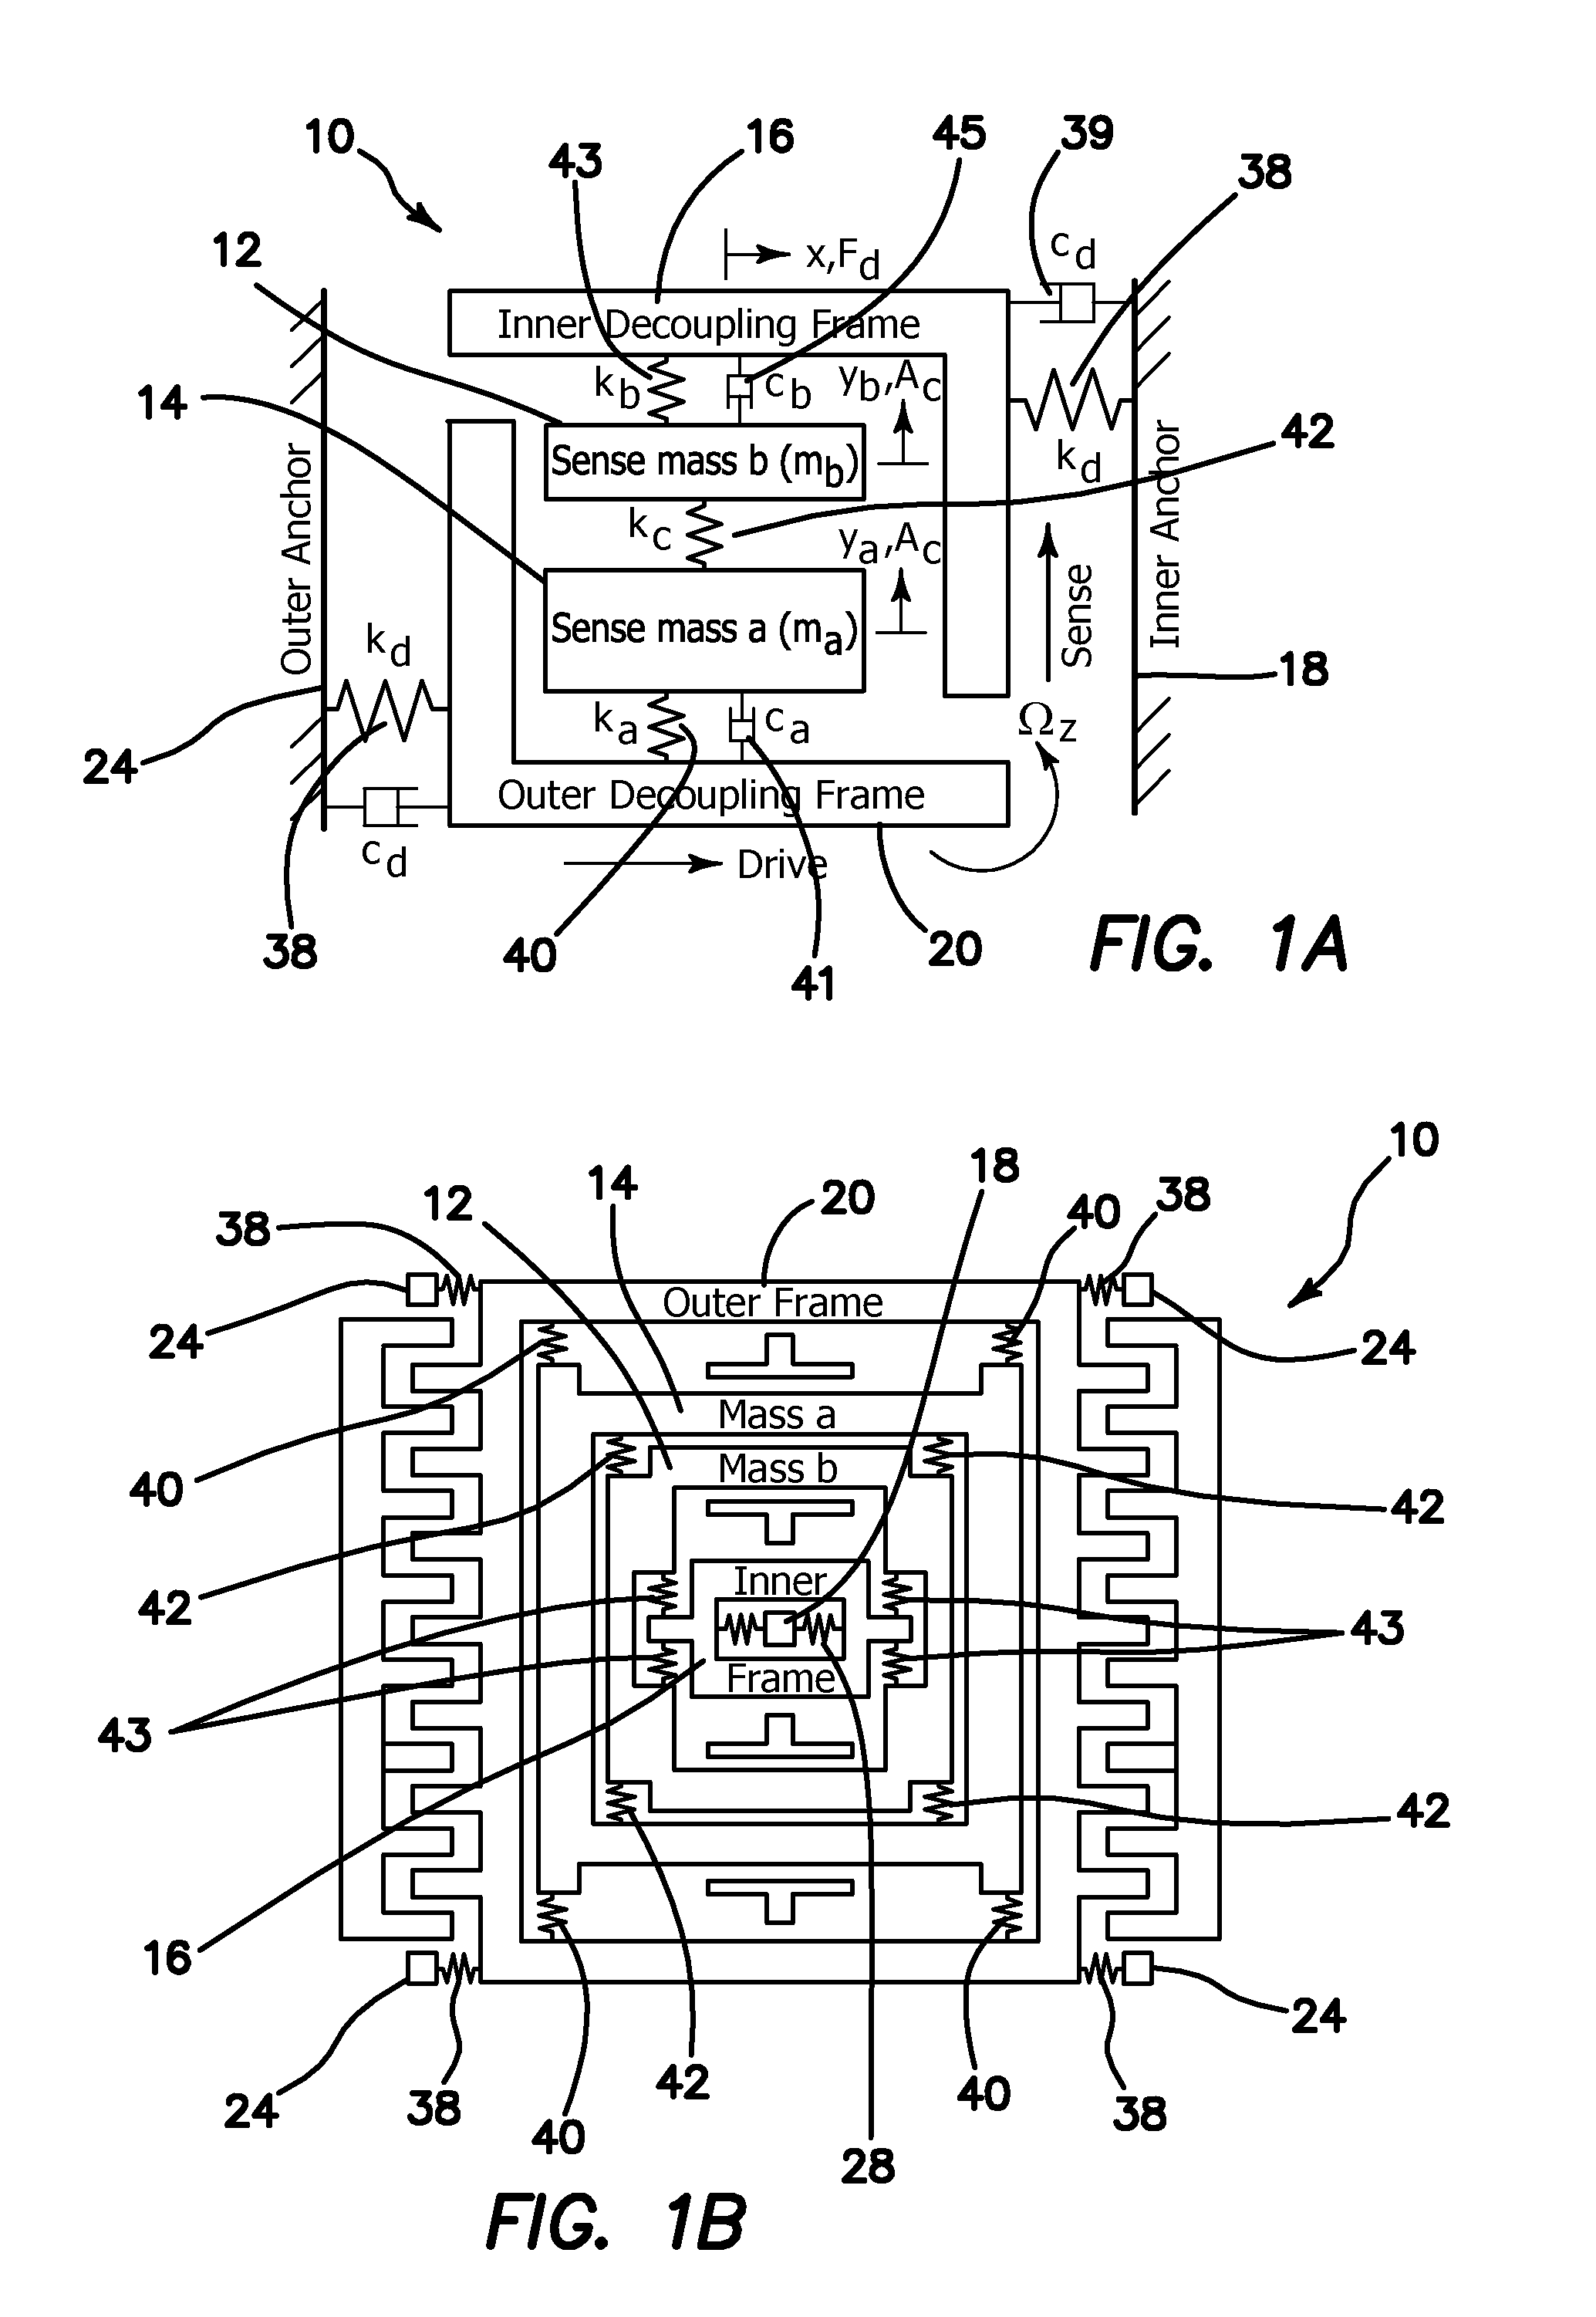 Micromachined Gyroscopes with 2-DOF Sense Modes Allowing Interchangeable Robust and Precision Operation